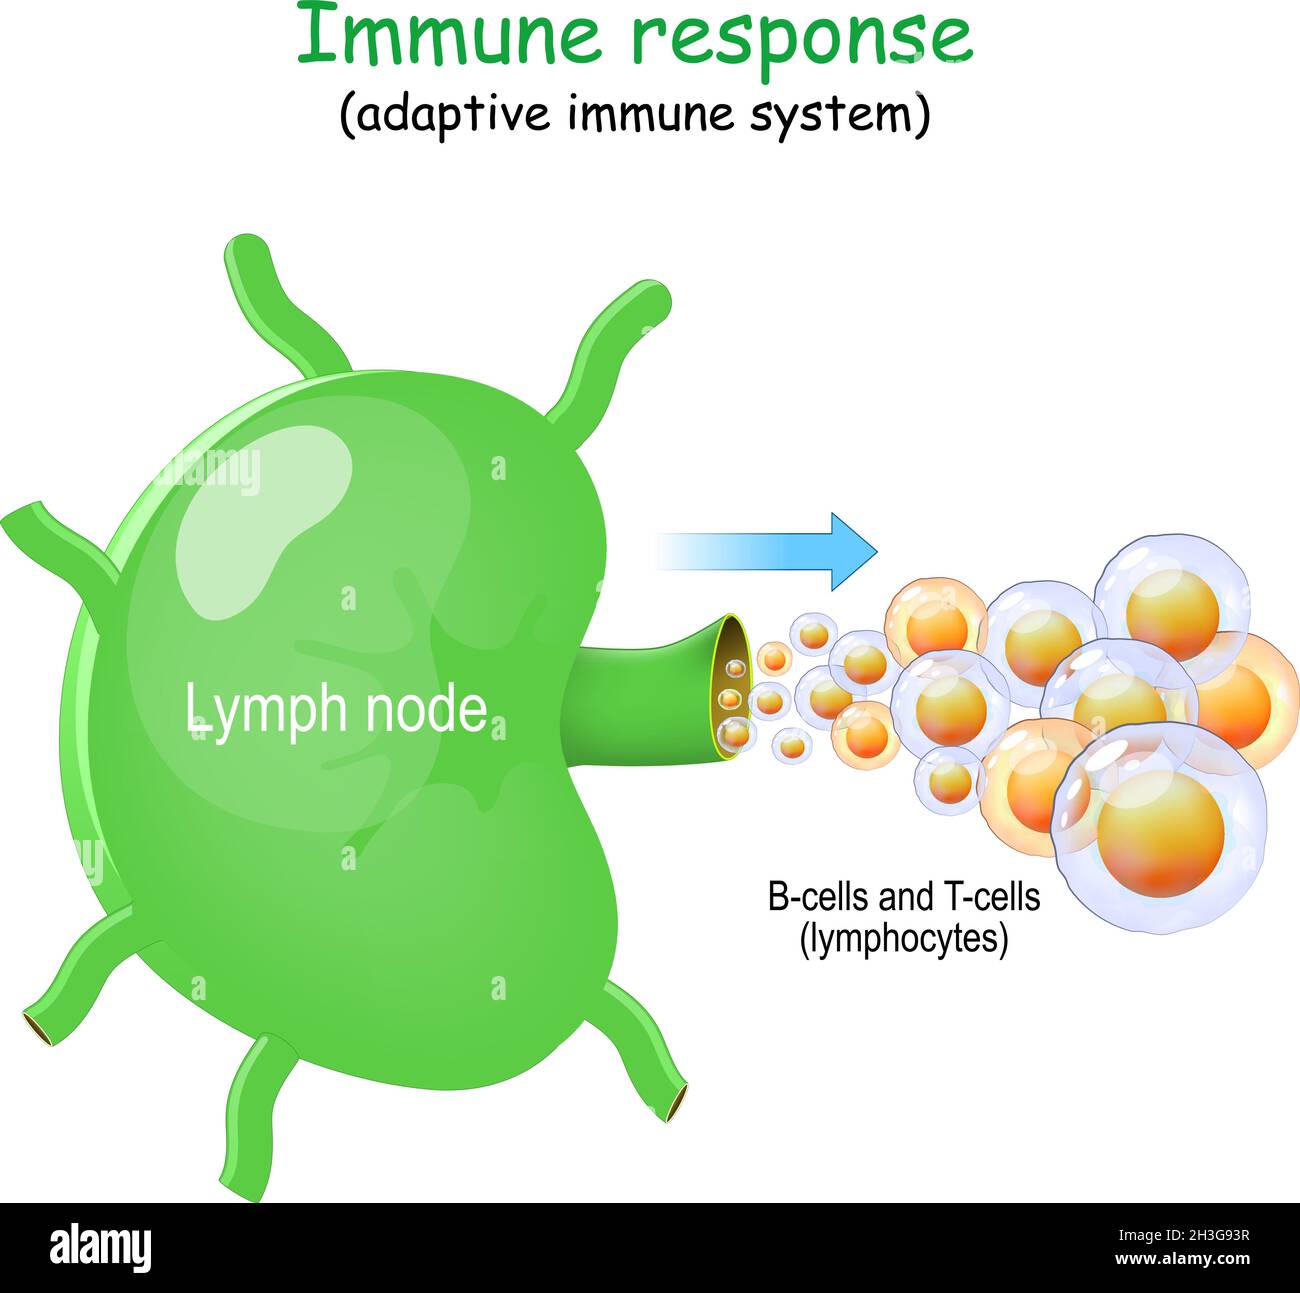 Lymph node and B-cells and T-cells. lymphocyte. Immune response. adaptive immune system. Lymphoma most commonly develops from lymphocytes in the lymph Stock Vector